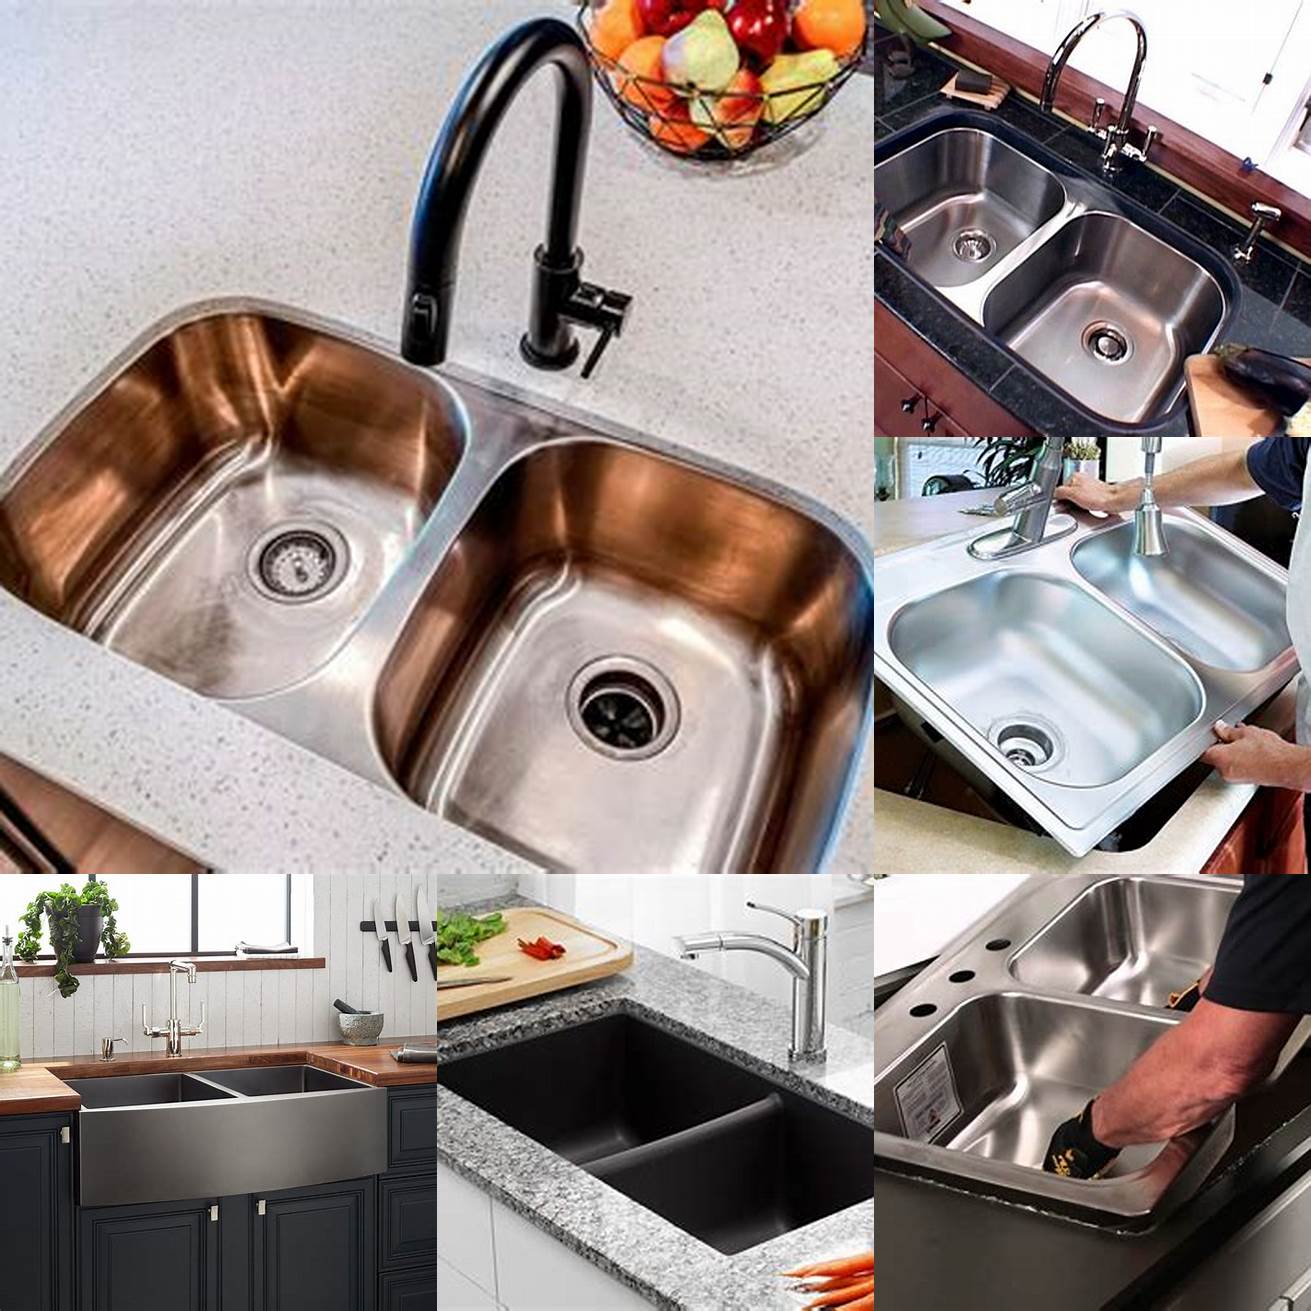 Can be more difficult and expensive to install than other types of sinks